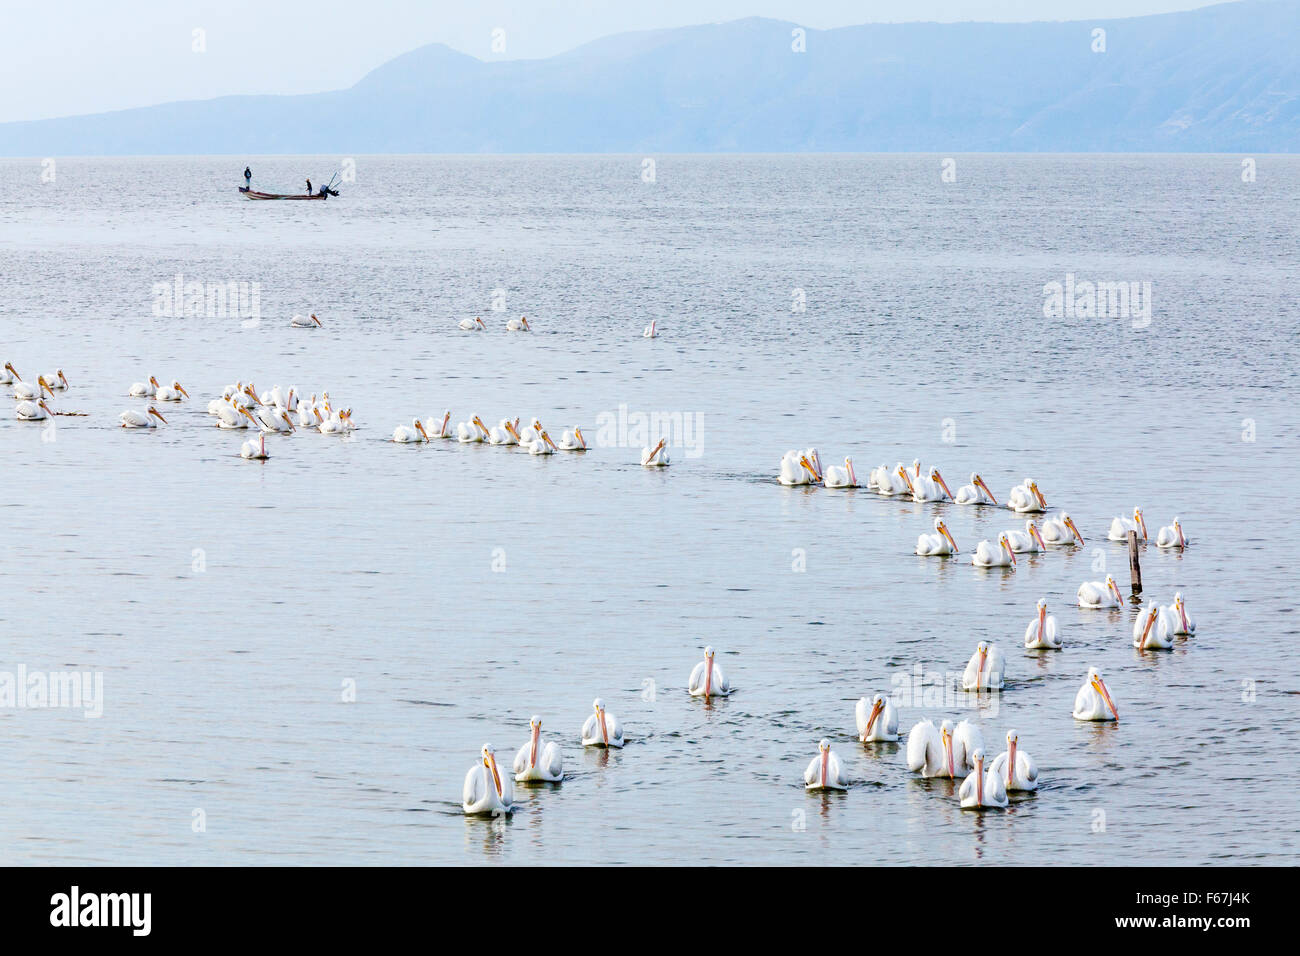 Several great american pelicans swim in formation on Lake Chapala, Mexico. Stock Photo